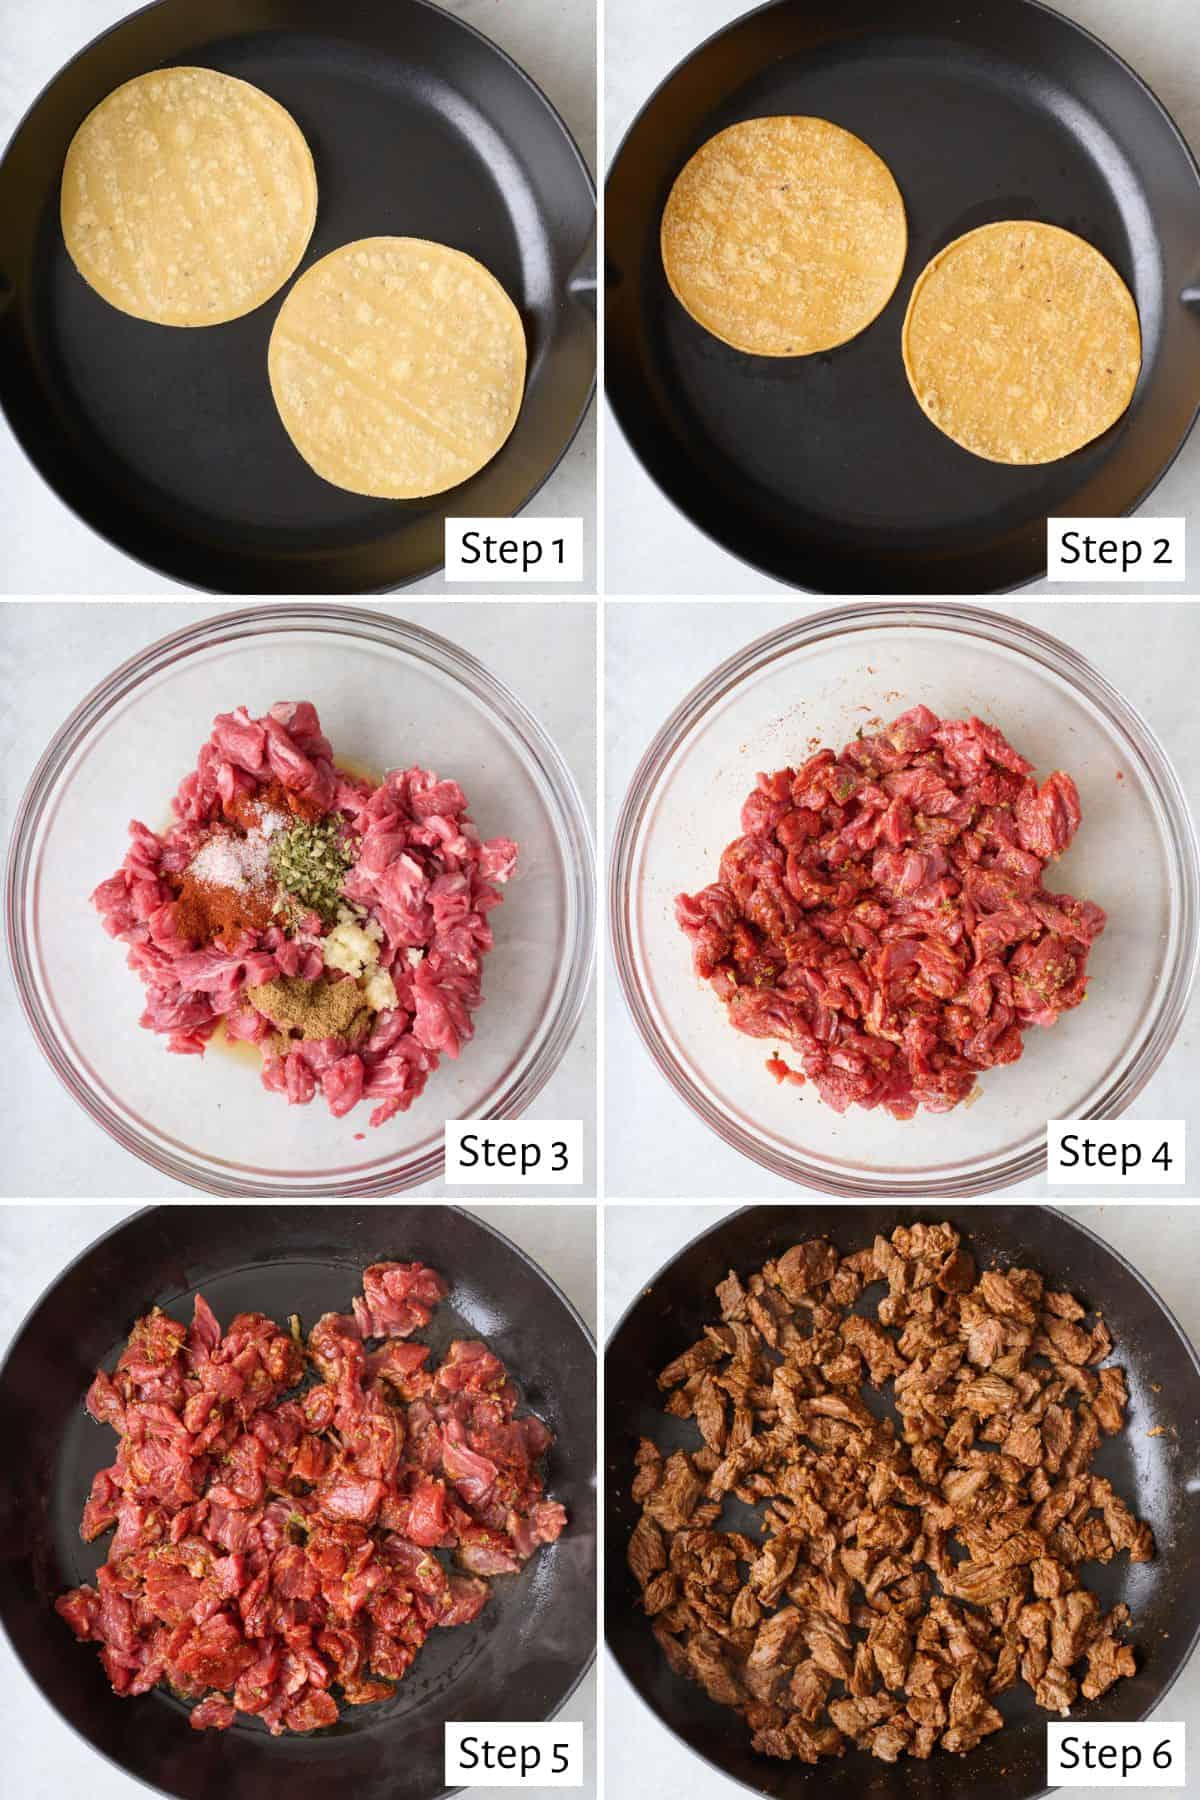 6 image collage making recipe: 1- corn tortillas on a skillet, 2- after flipping, 3- meat and spices in a bowl, 4- after tossing together, 5- seasoned meat in same pan before cooked, 6- after cooking.